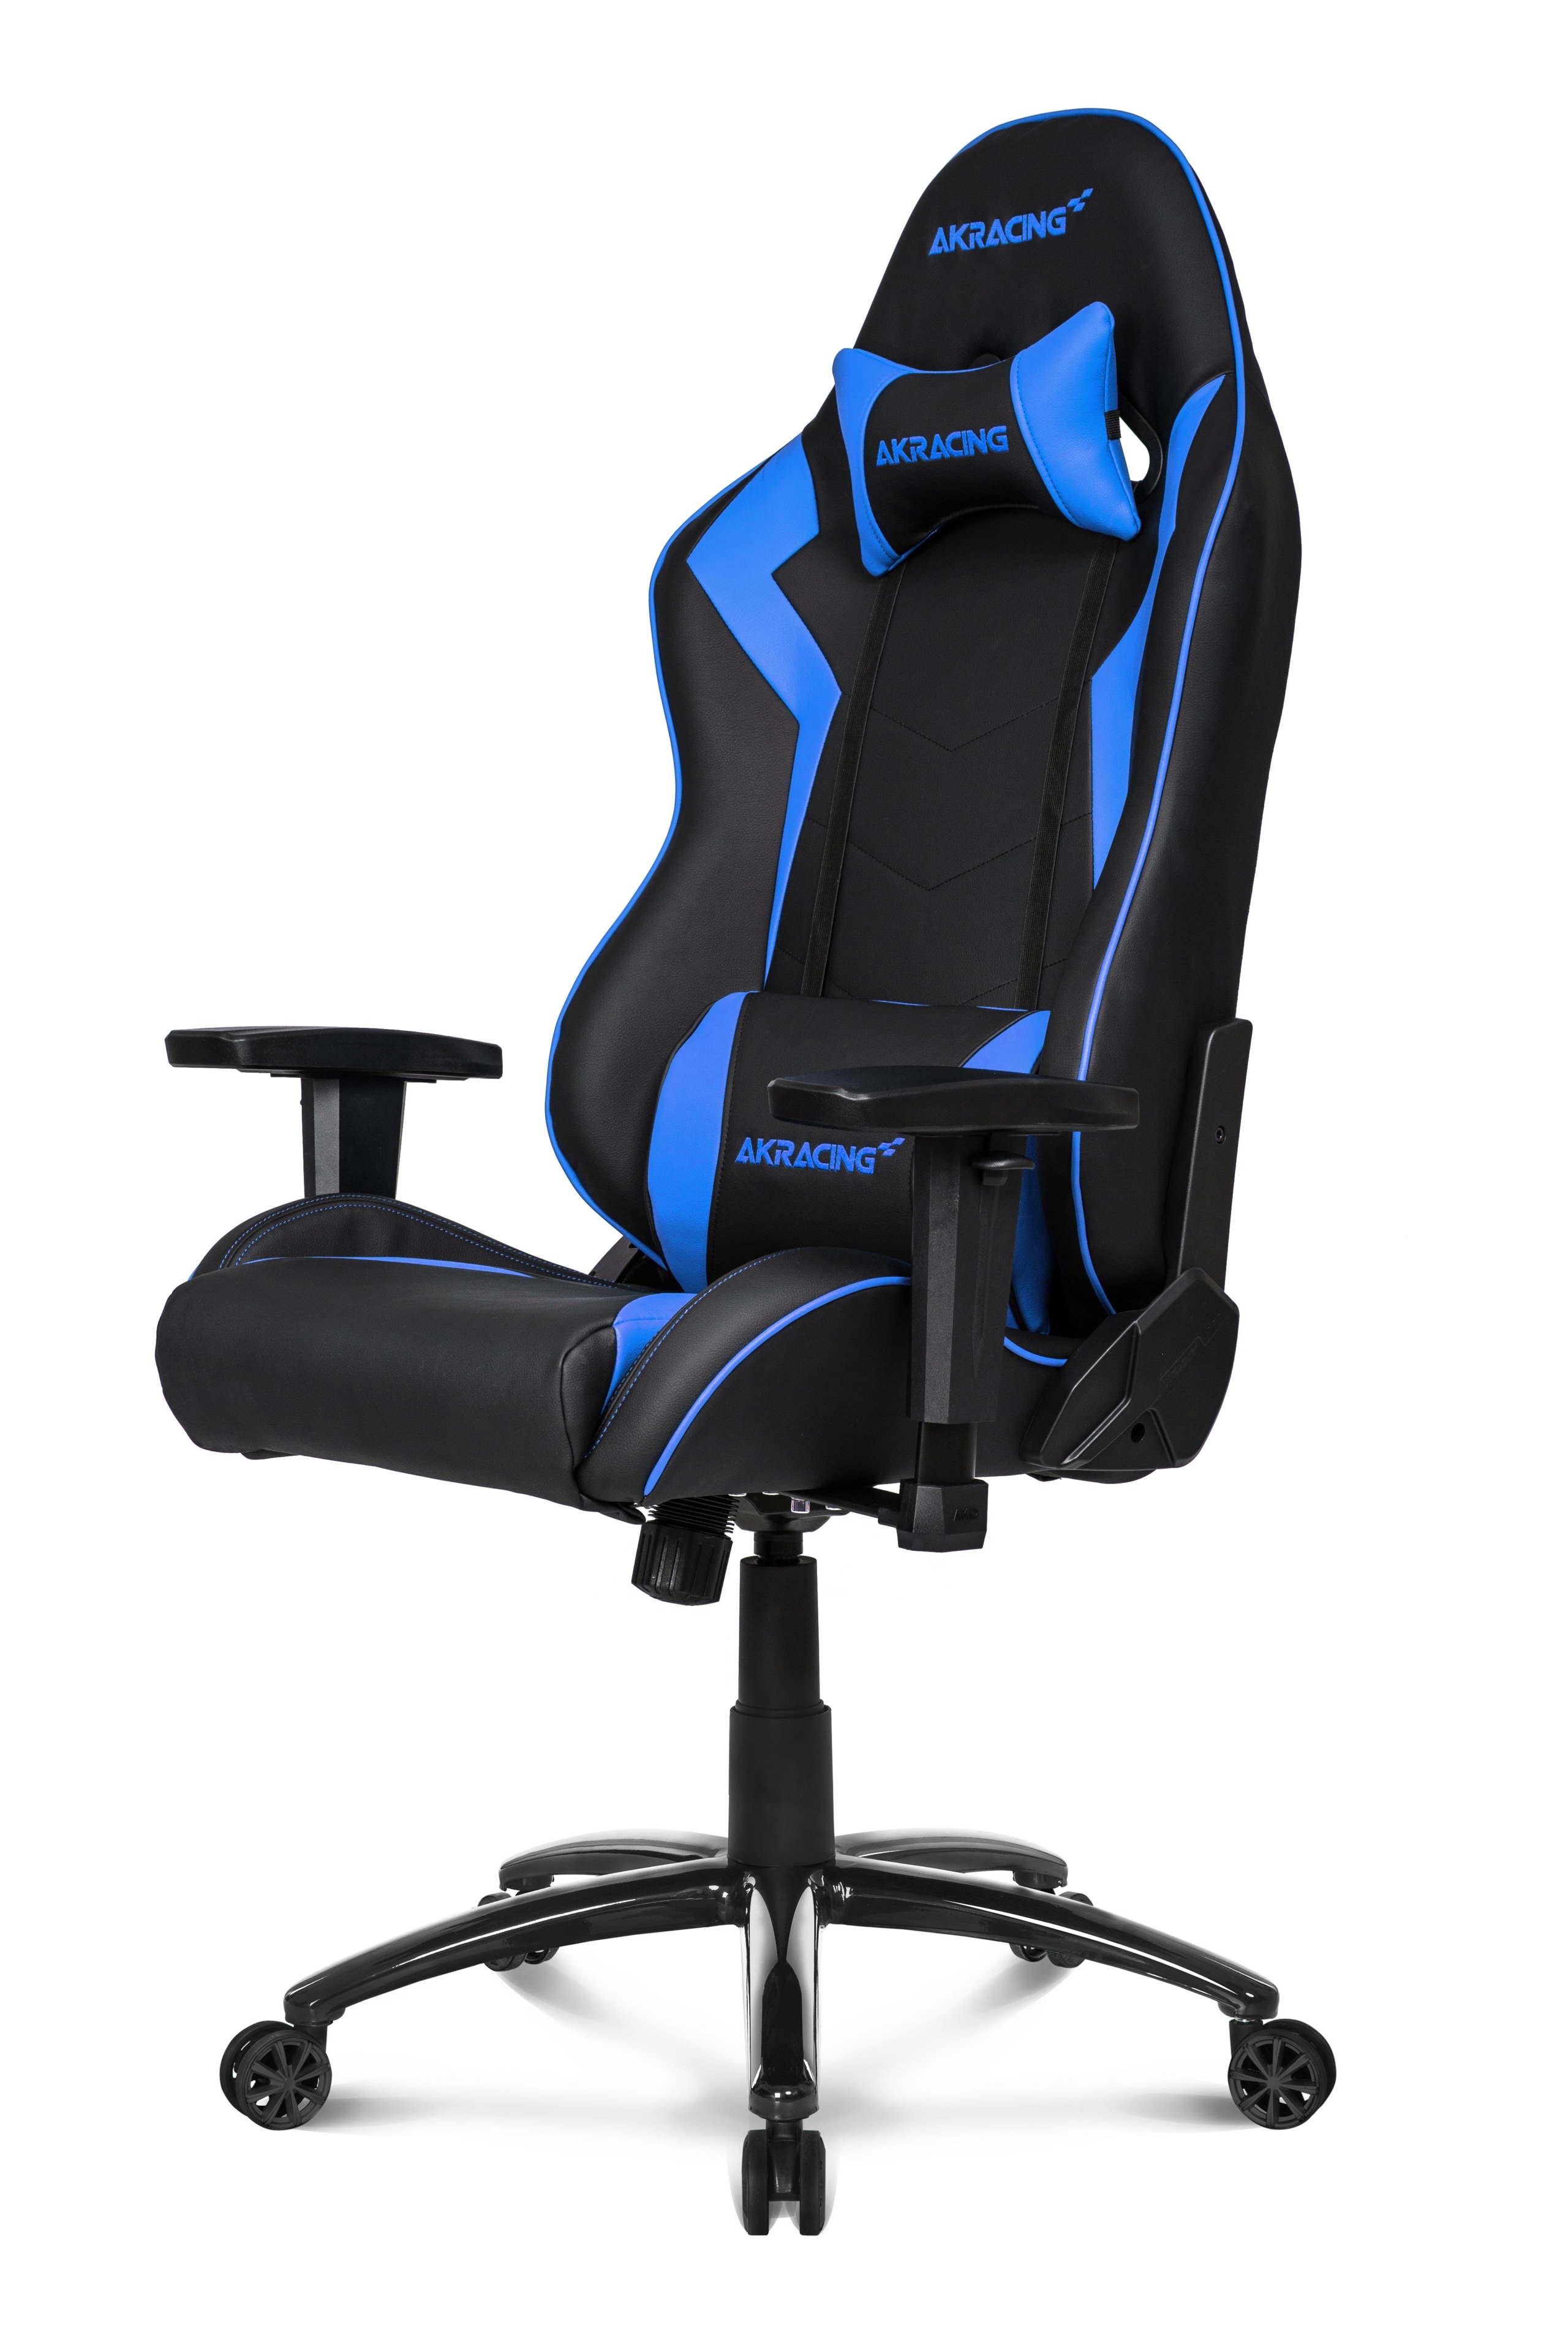 The best gaming chairs